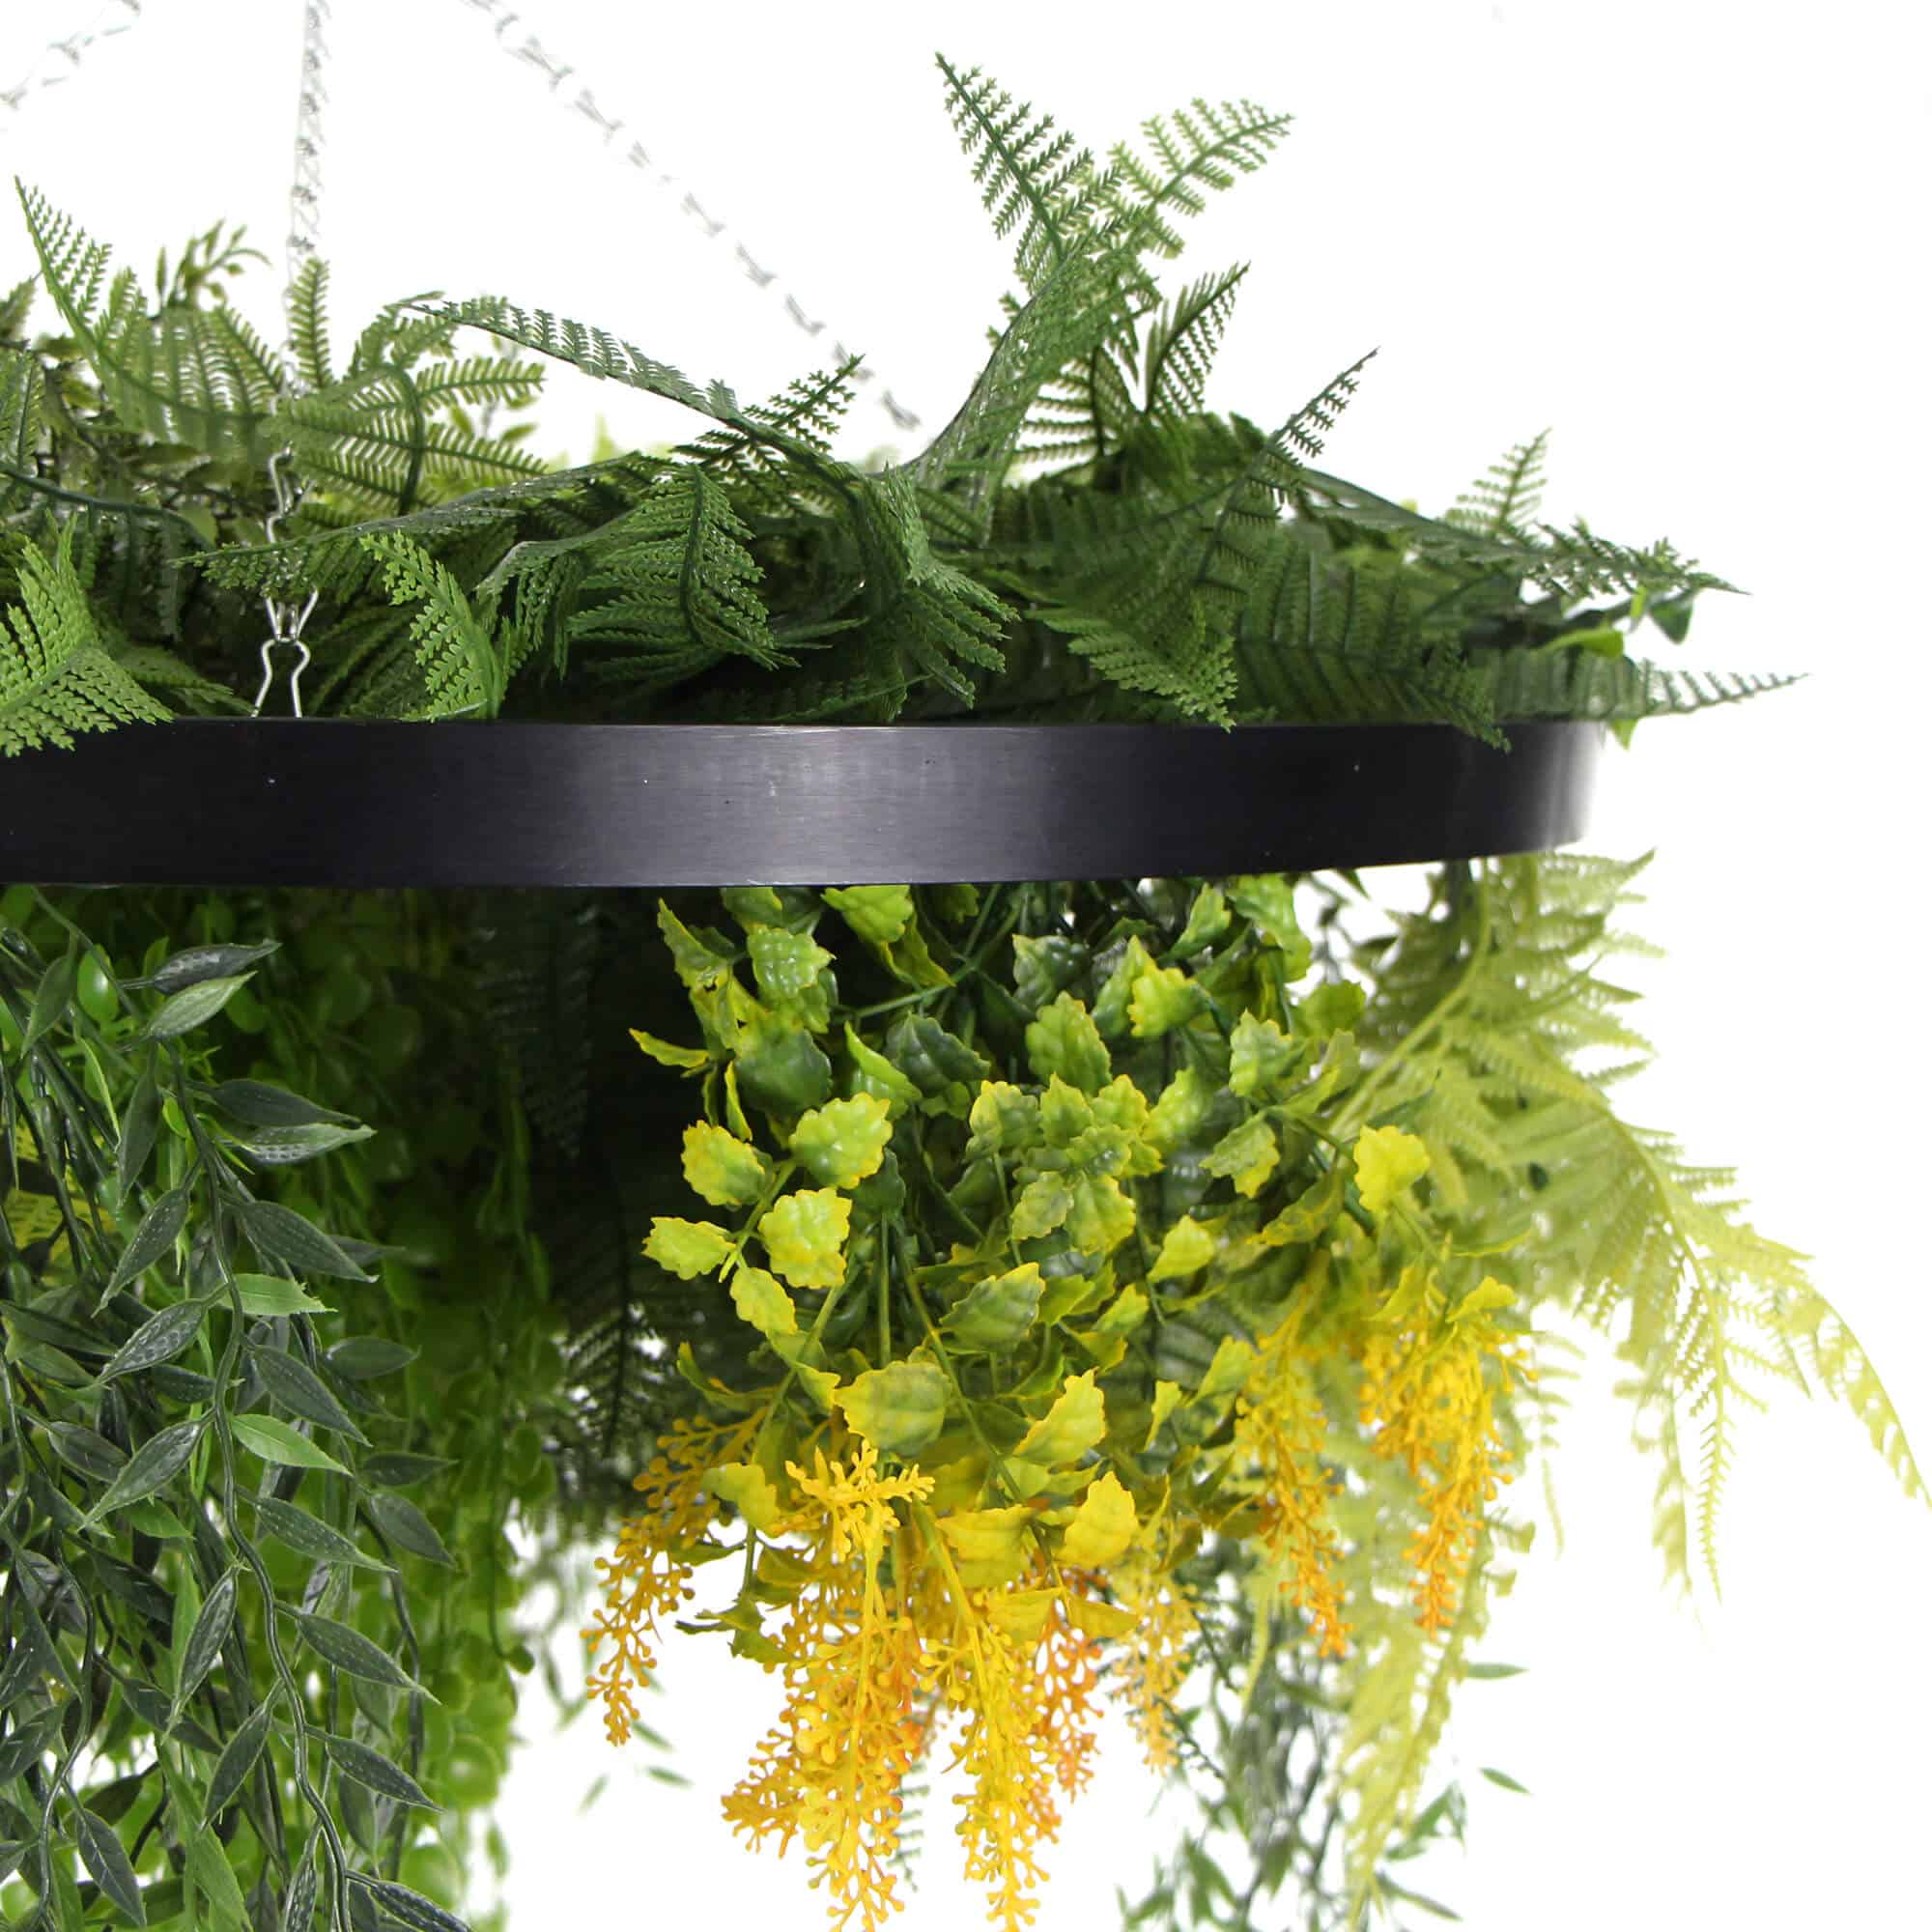 Black Framed Roof Hanging Disc with Draping Pearls Ferns 60cm Diameter Hanging Faux Pearls and Ferns